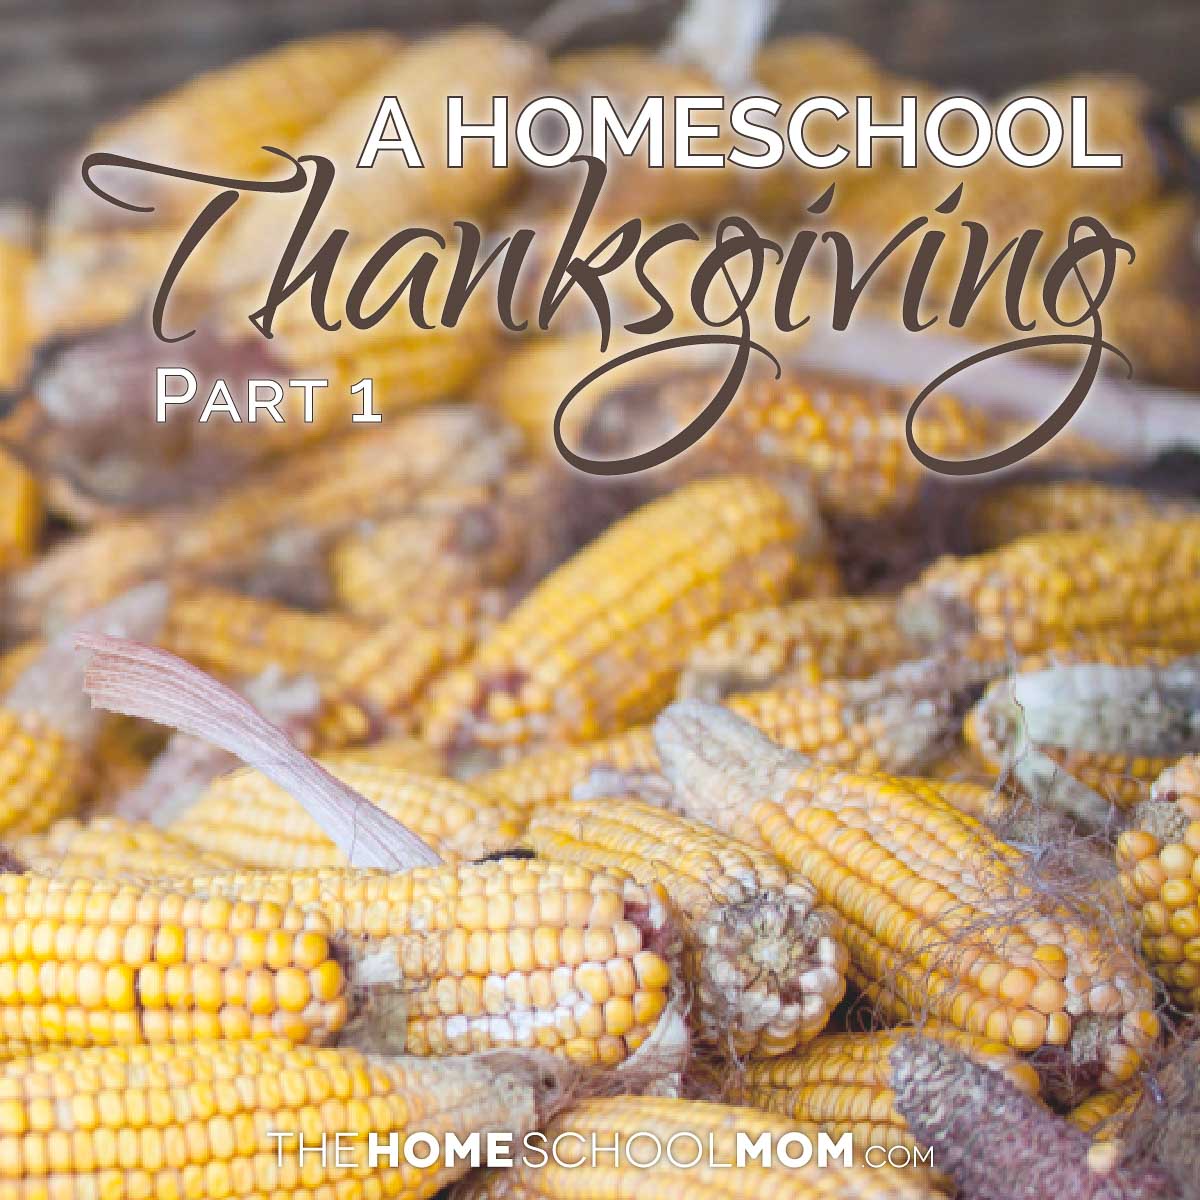 Dried corn in a corn crib with text A Homeschool Thanksgiving Part 1 TheHomeSchoolMom.com